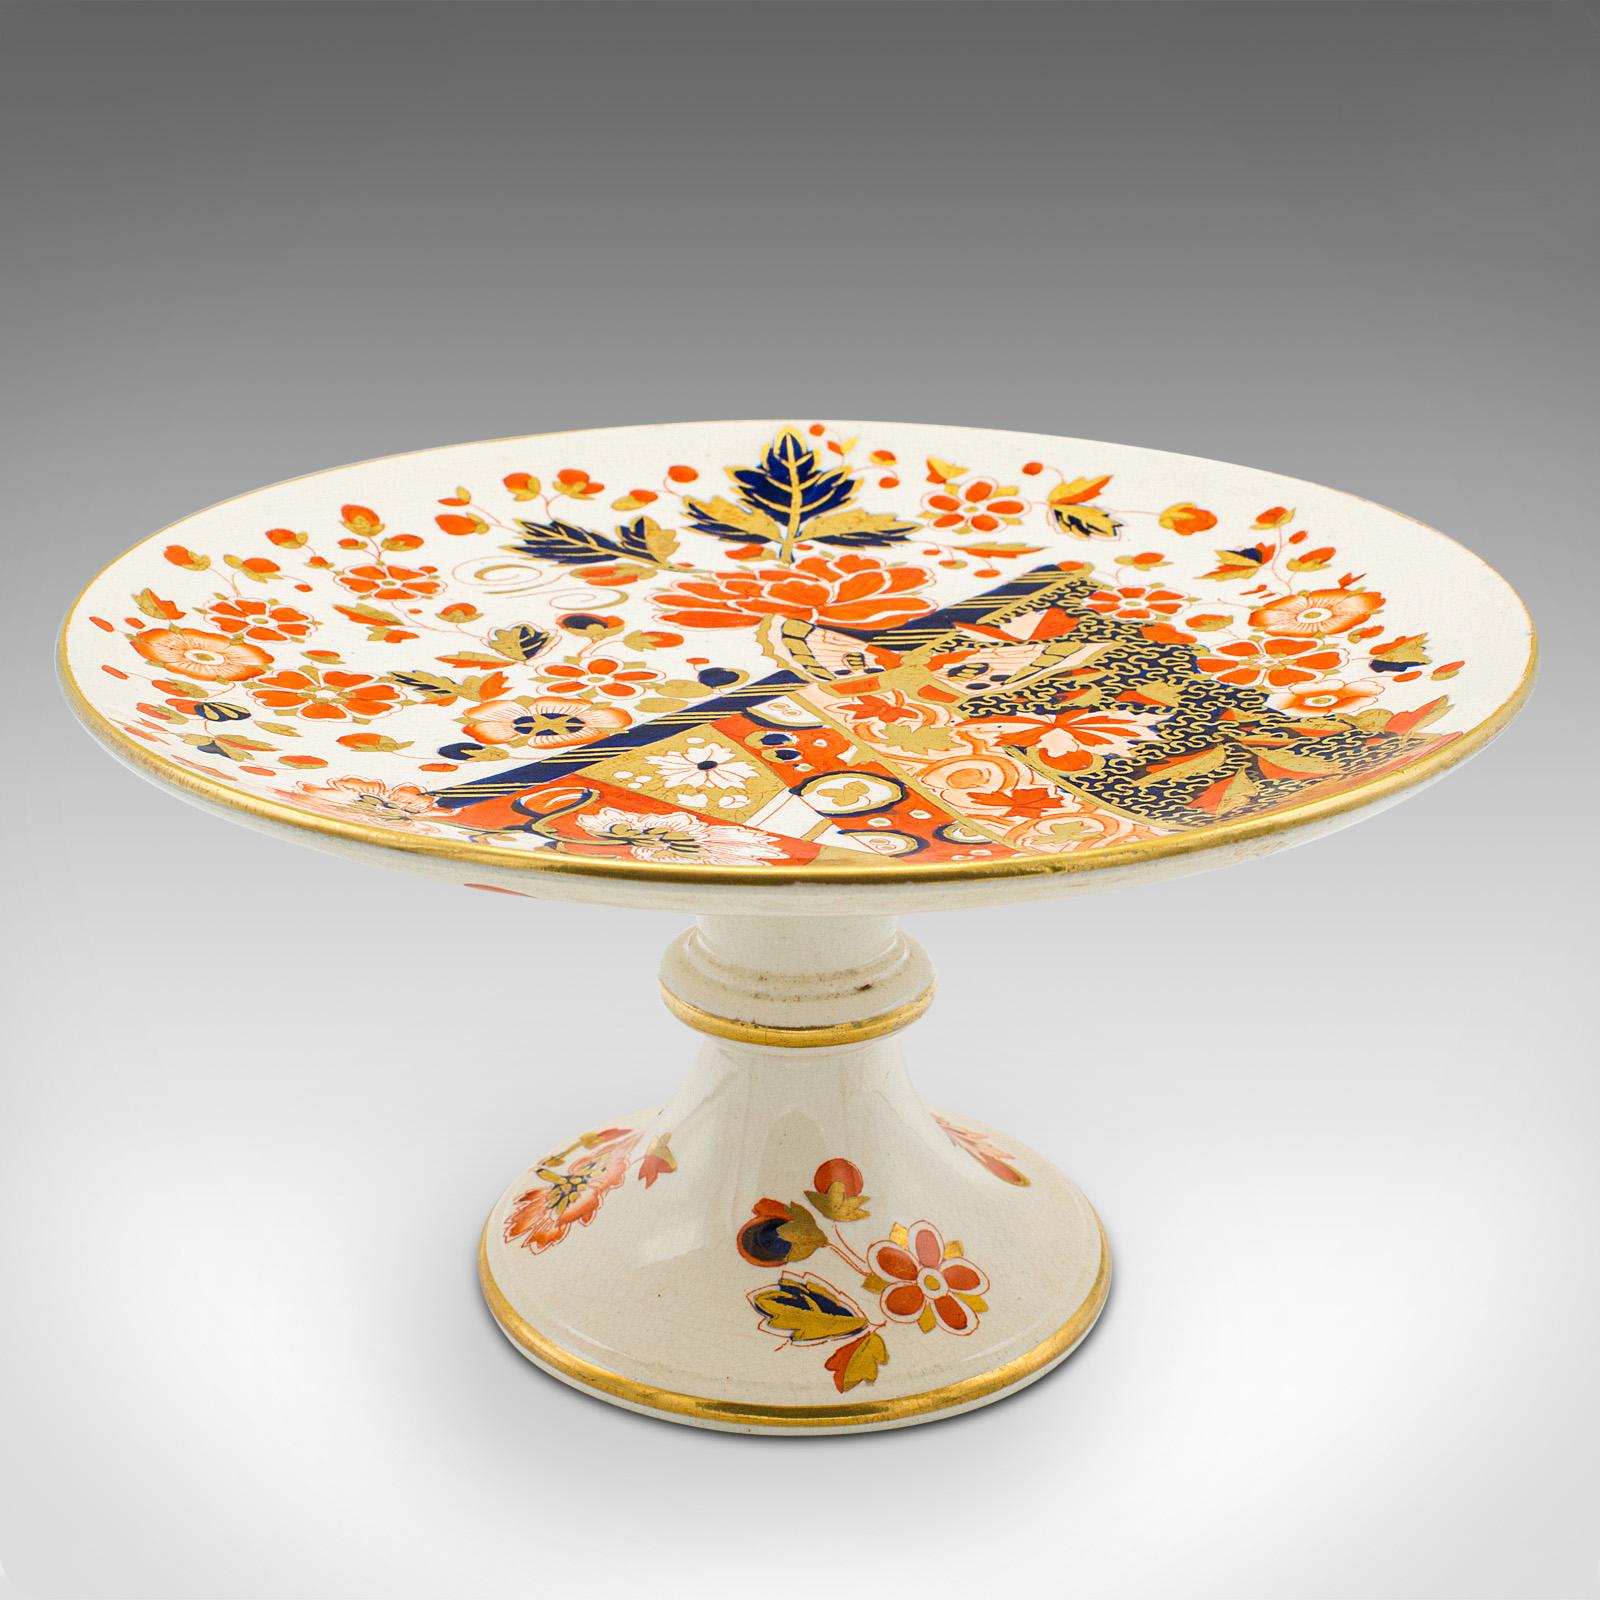 This is an antique decorative cake stand and sugar bowl. An English, ceramic afternoon tea set, dating to the late Victorian period, circa 1890.

Delightful decorative appeal to bring a dash of colour to afternoon tea
Displays a desirable aged